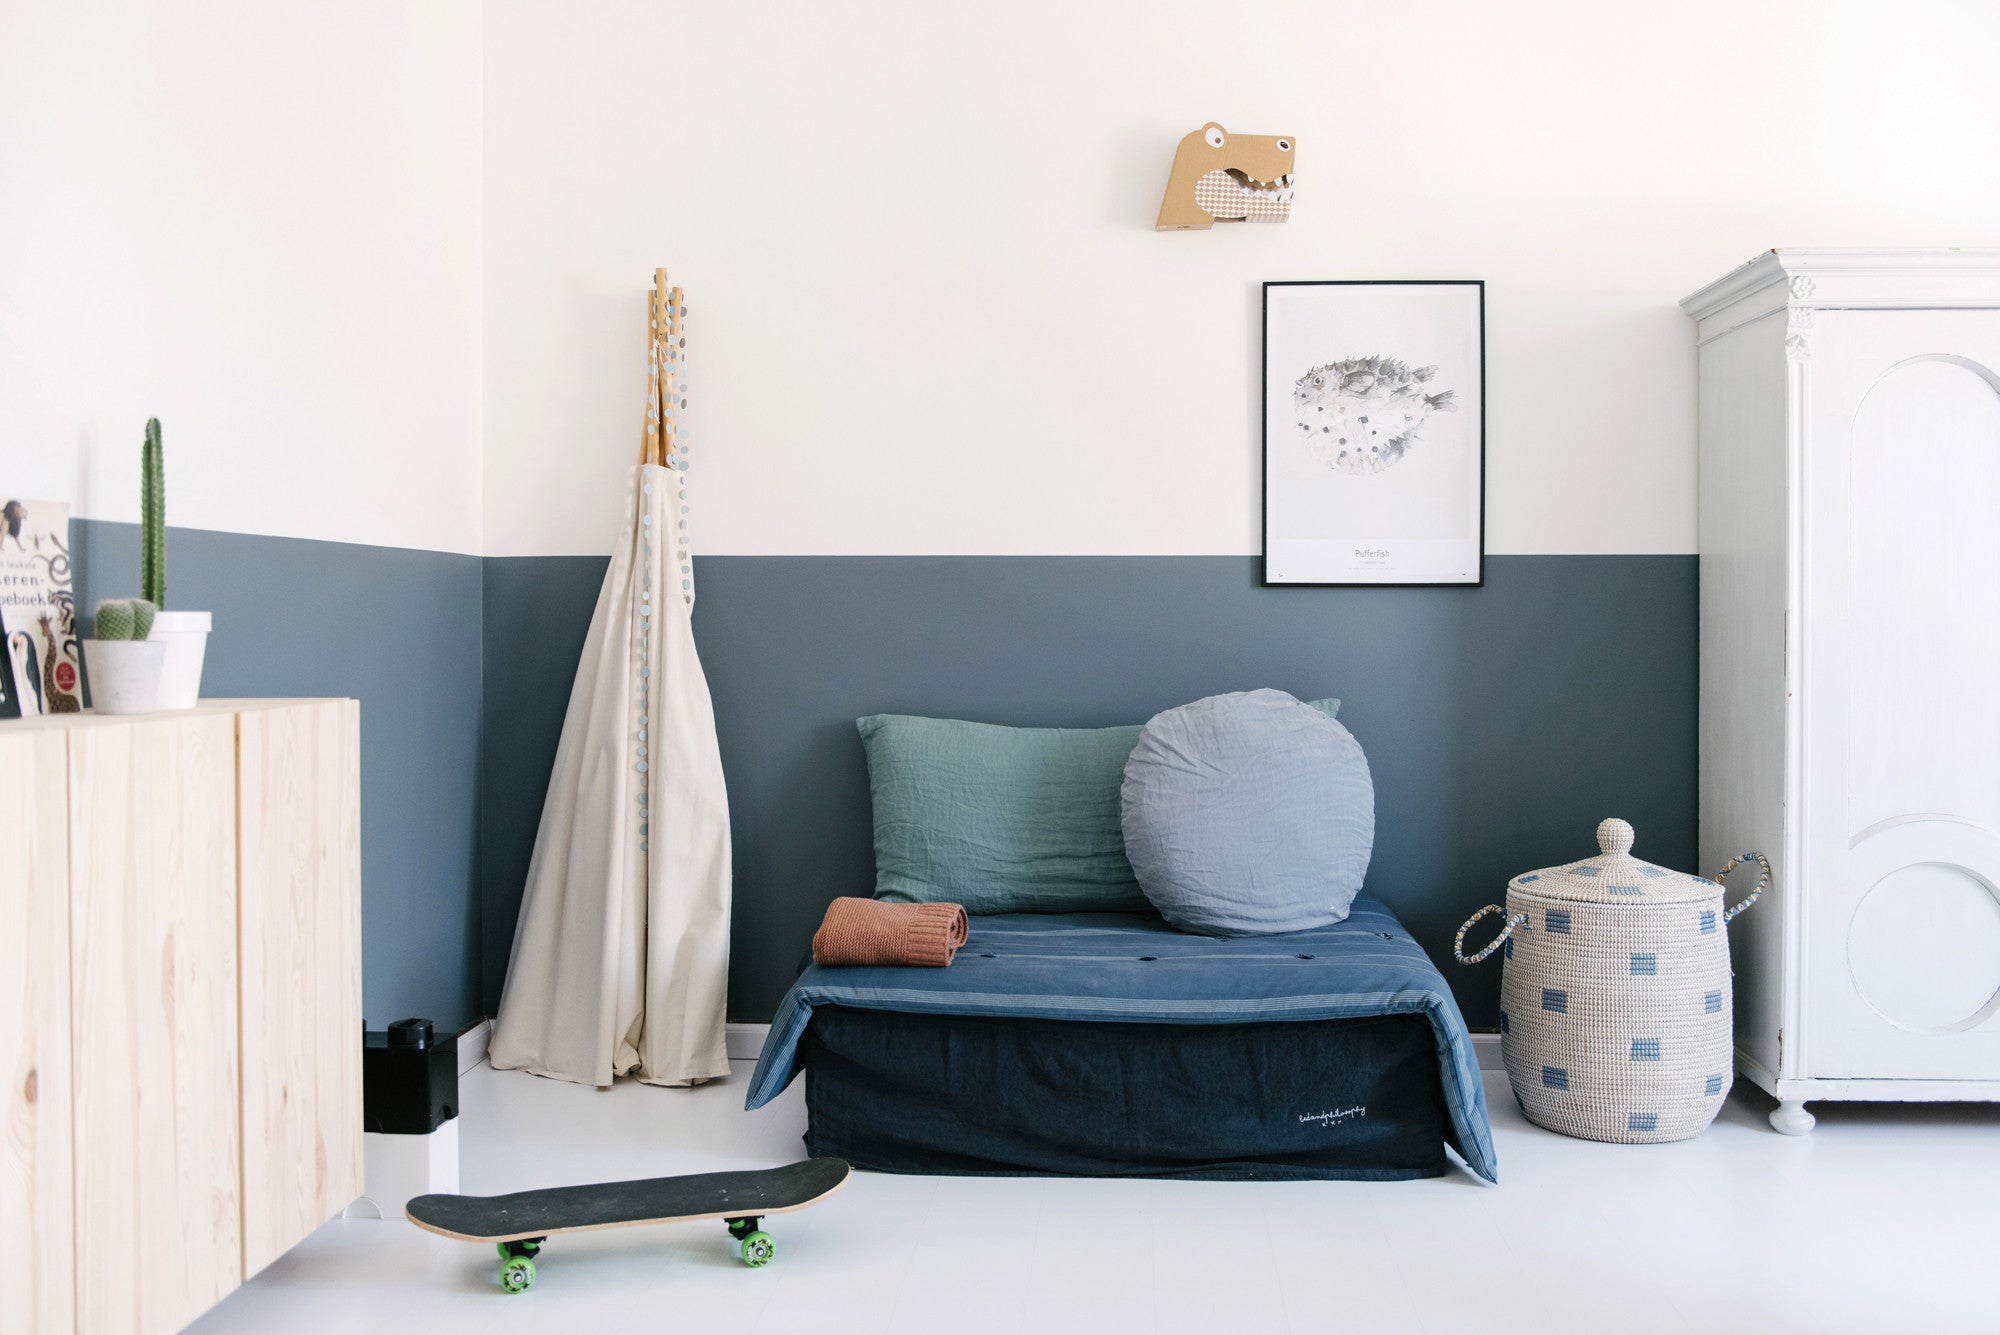 Boys Playroom, styled by Live Loud Girl, as featured on Bobby Rabbit.